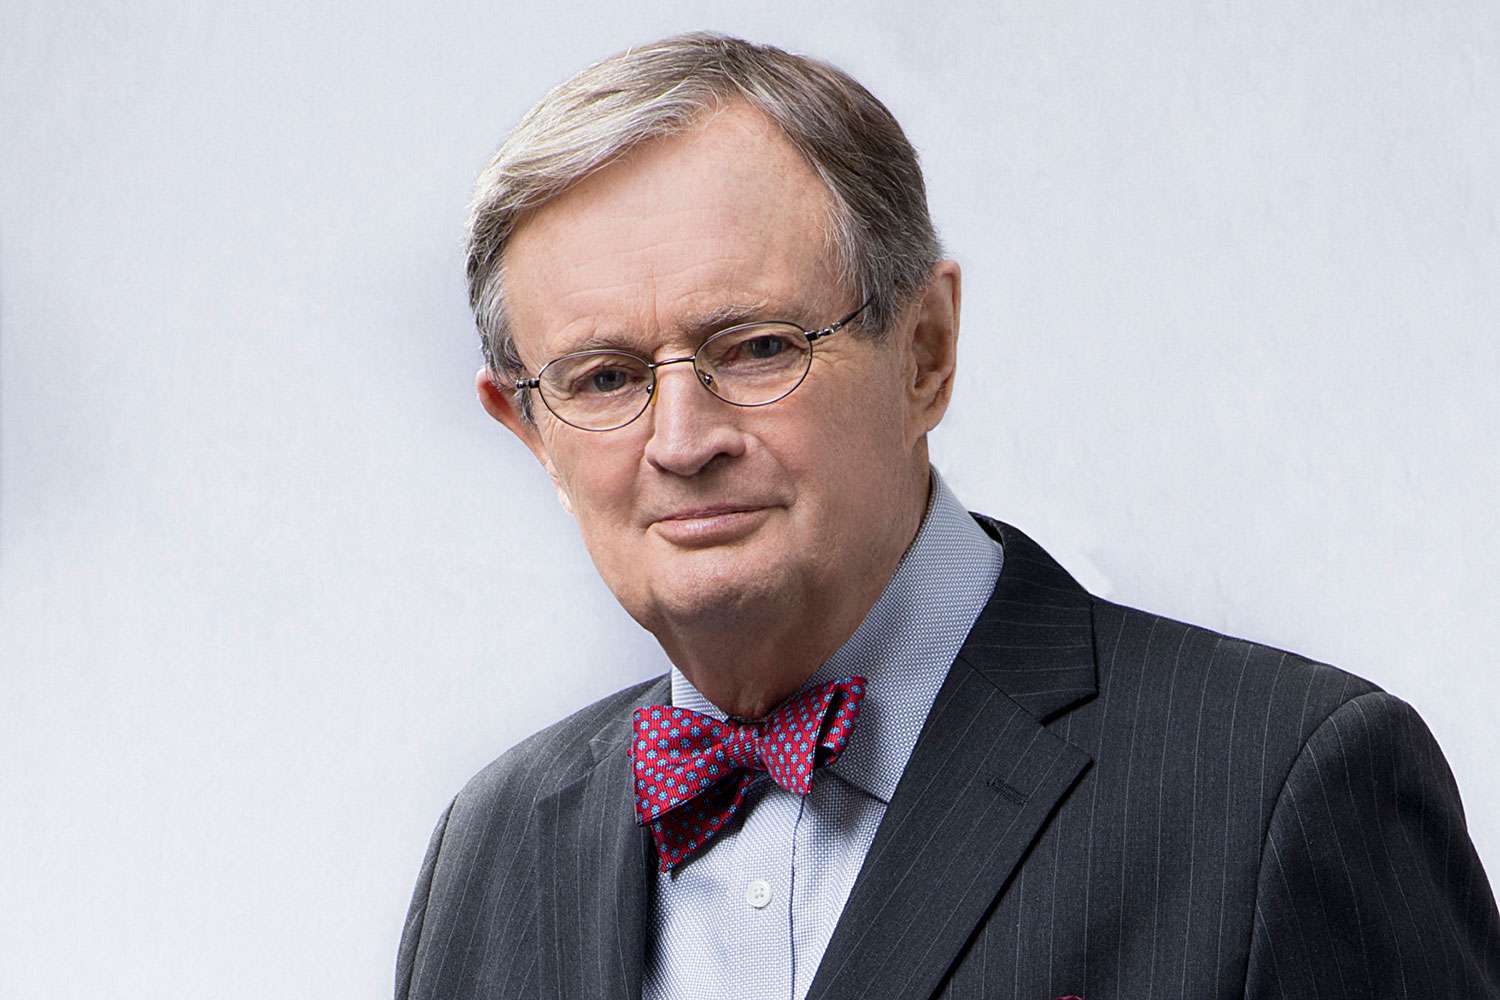 LOS ANGELES - NOVEMBER 2: David McCallum of the CBS series NCIS, scheduled to air on the CBS Television Network. (Photo by John Paul Filo/CBS via Getty Images)